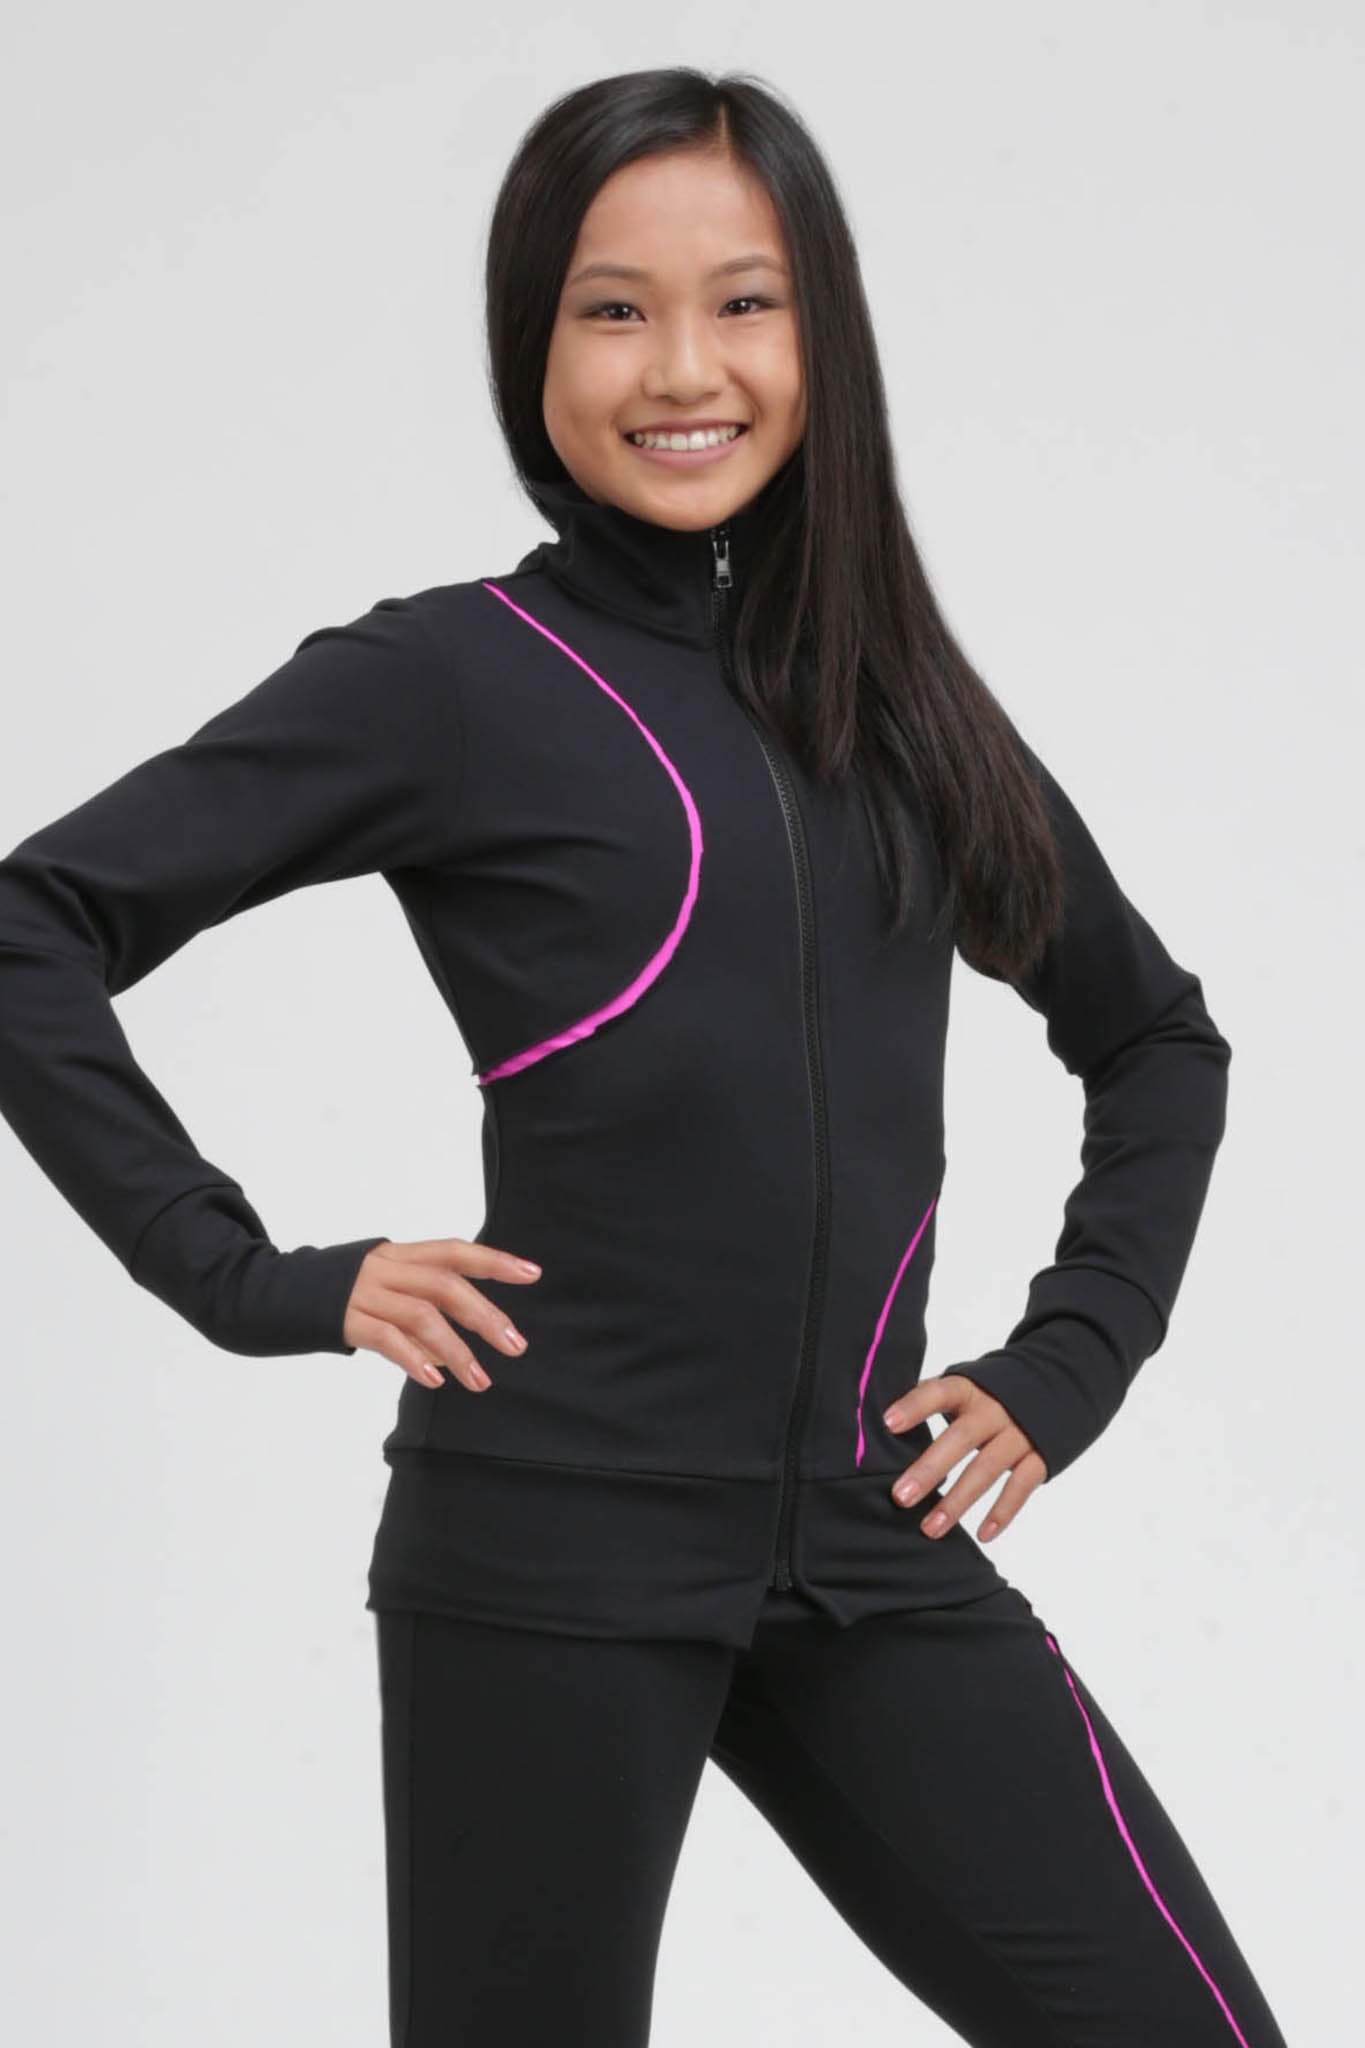 Signature Ripped Swirl Ice Skating Jacket for Training or About Town Ladies: M